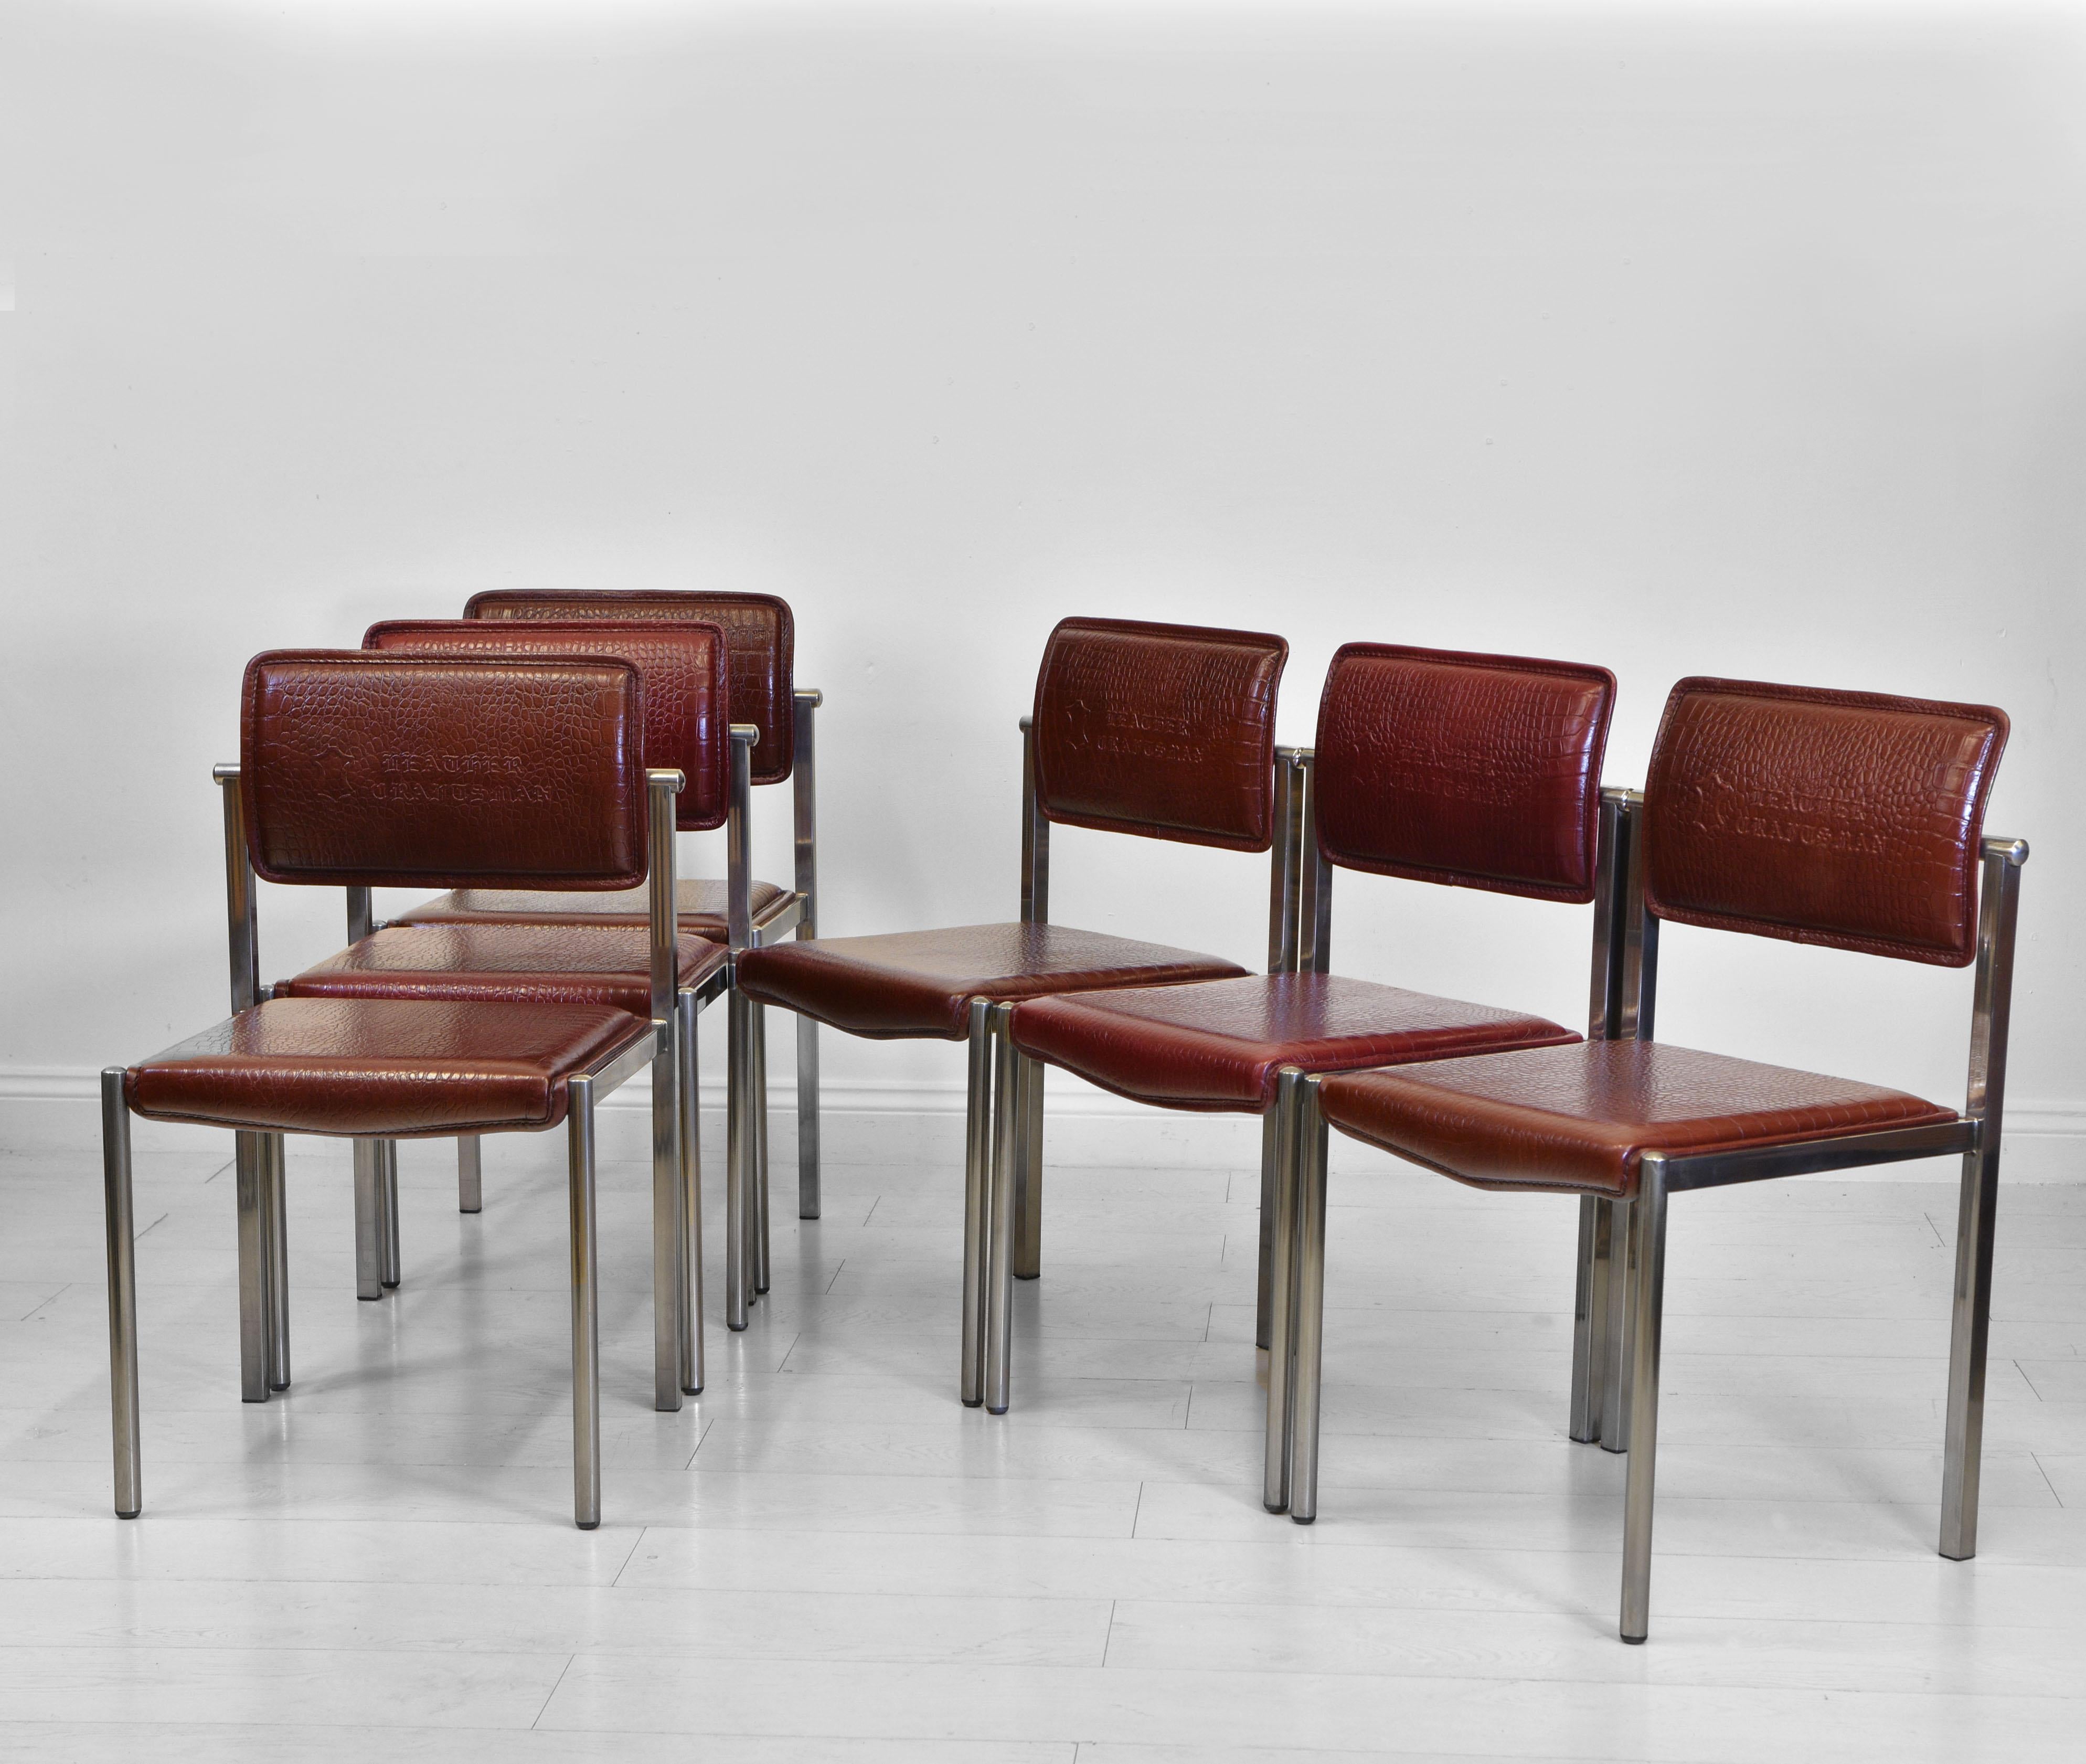 Vintage set of six embossed faux crocodile pattern leather & chrome plated steel dining chairs. Circa 1970.

The chairs are of very good quality, and have a good weight to them. Each chair is embossed stamped 